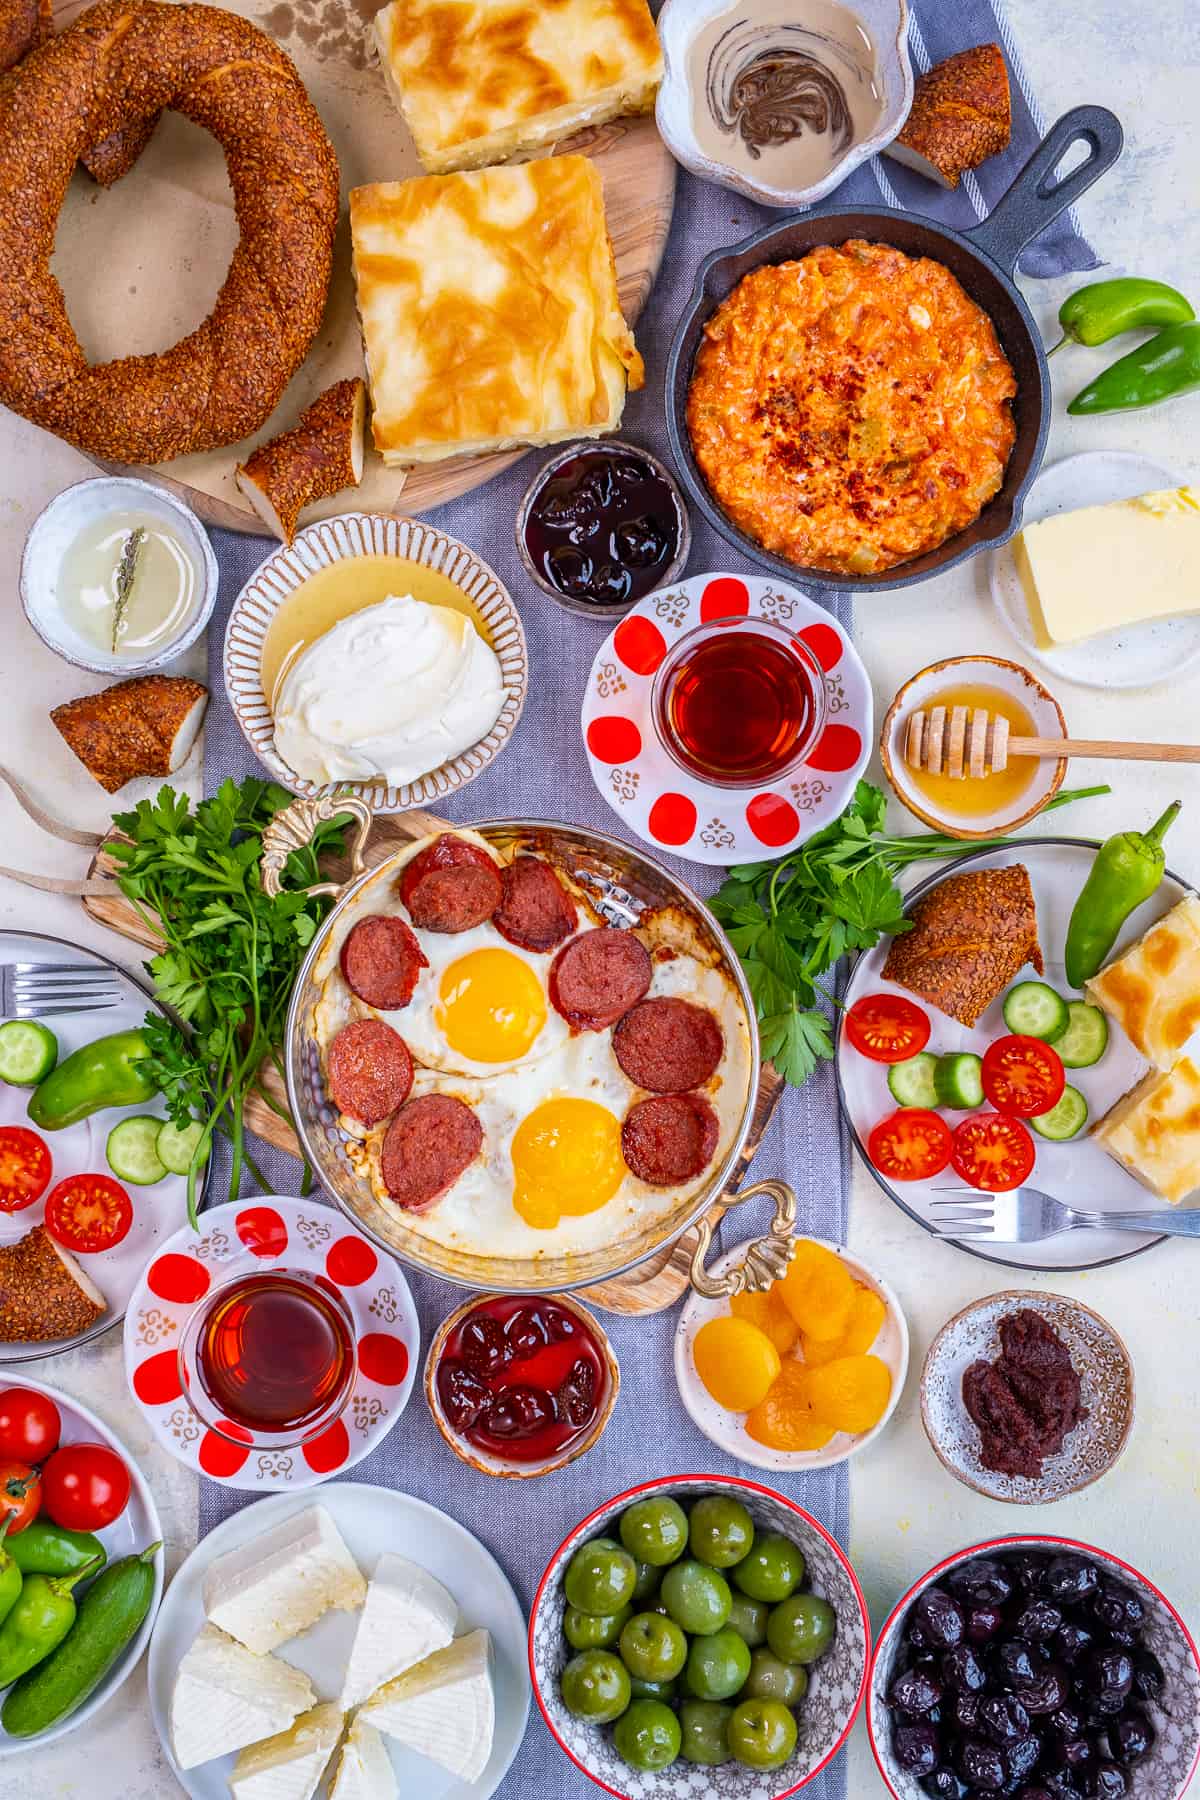 Flat-lay of Turkish breakfast with egg dishes in copper pan, pastries like borek and simit, jams, olives, cheese, vegetables and Turkish tea in traditional tulip glasses.